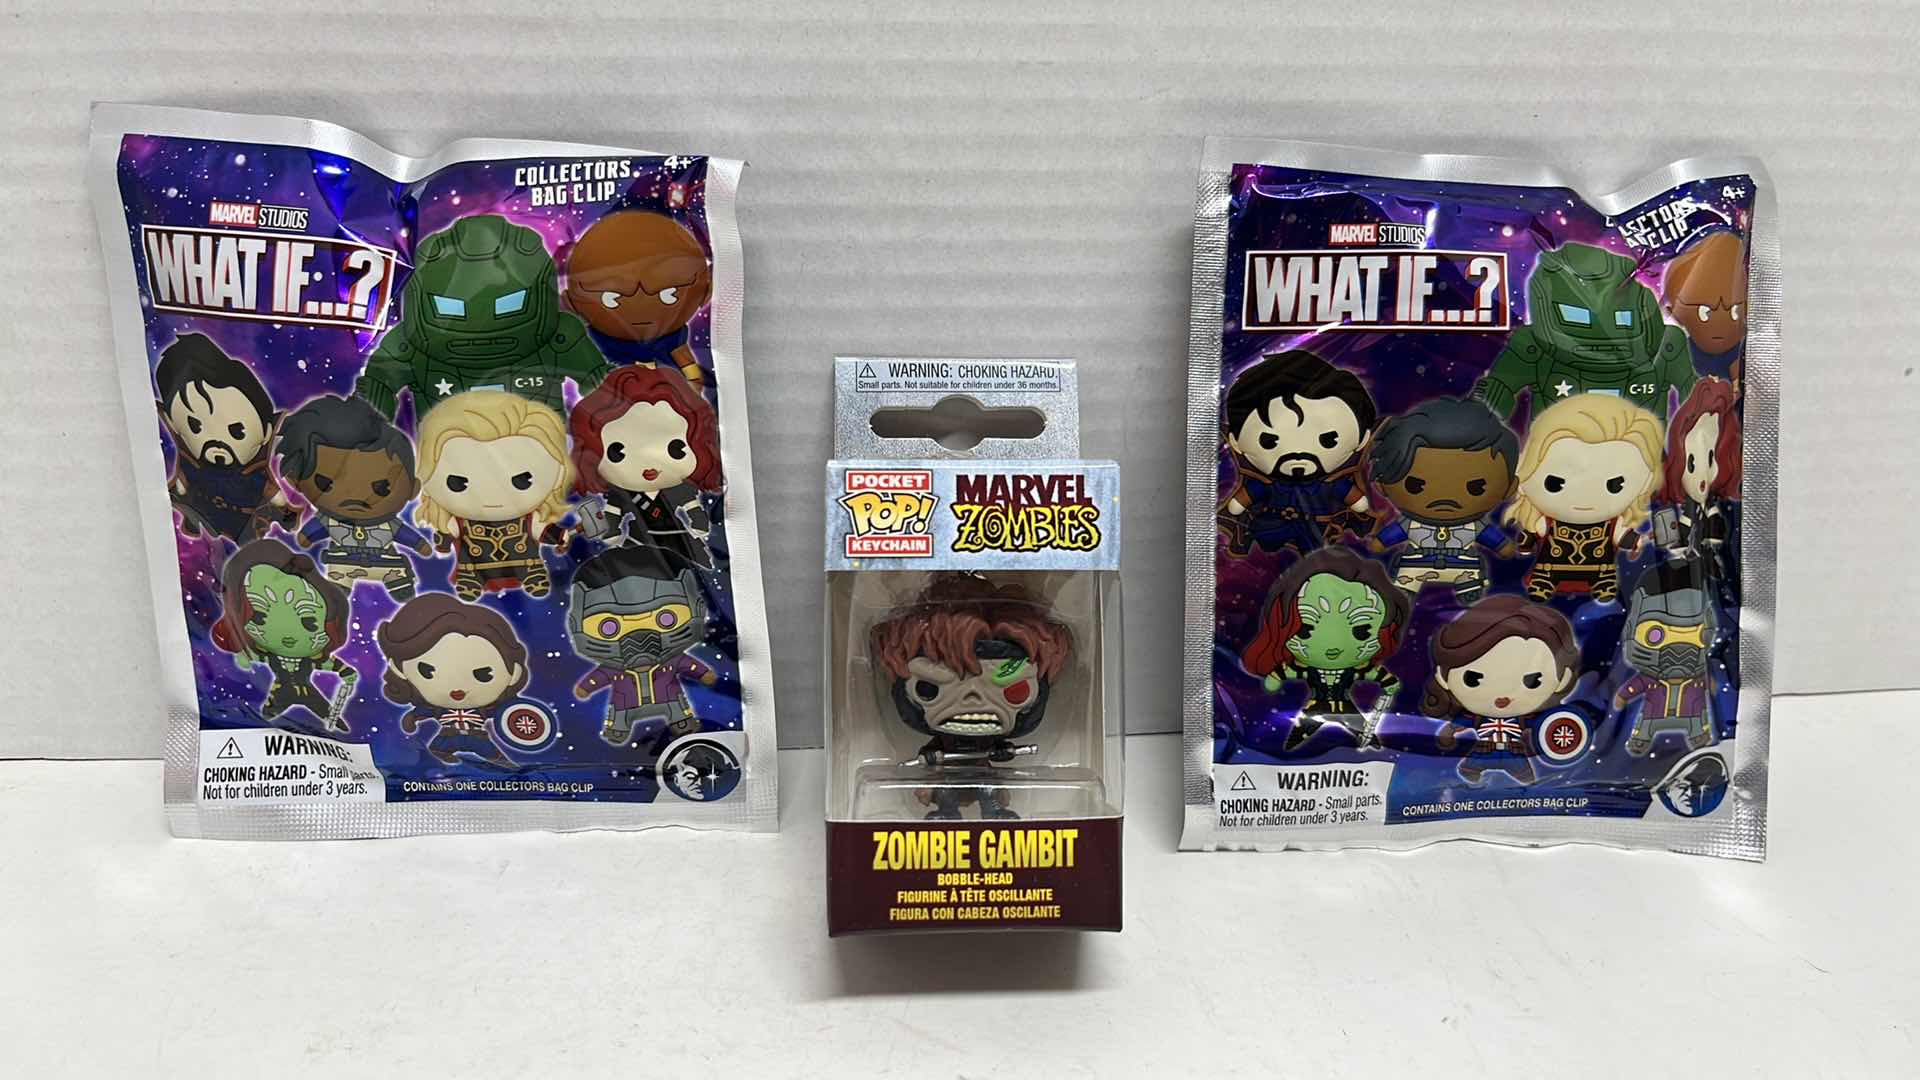 Photo 1 of NIP MARVEL STUDIOS WHAT IF? MYSTERY COLLECTORS BAG CLIPS & MARVEL ZOMBIES GAMBIT BOBBLEHEAD FUNKO POCKET POP KEY CHAIN (3)